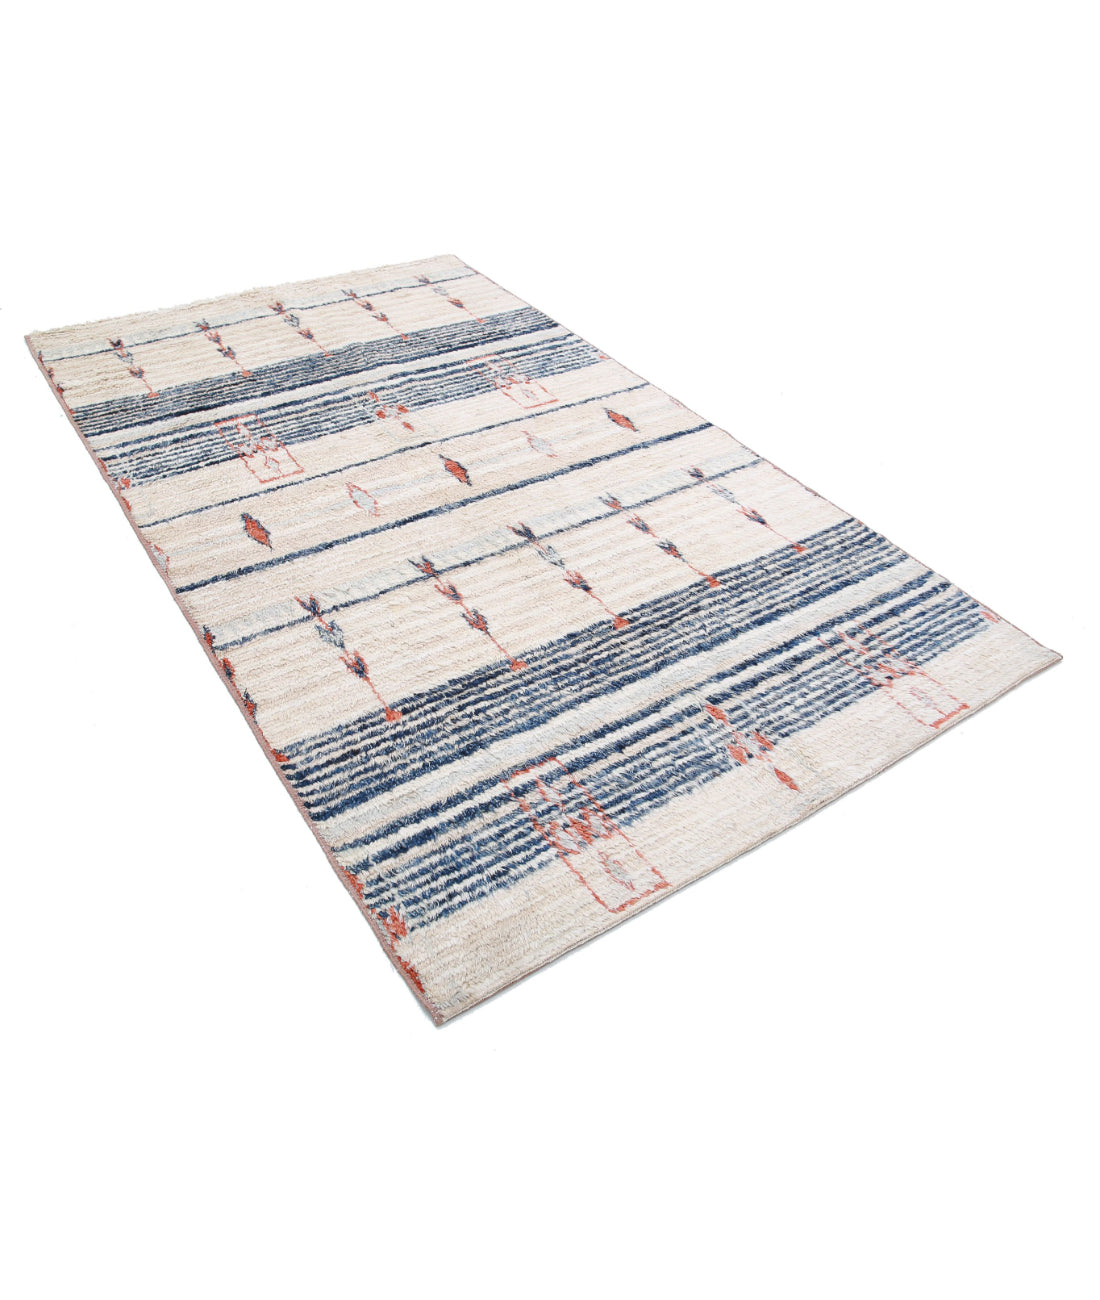 Hand Knotted Tribal Moroccan Wool Rug - 4'11'' x 8'4'' 4'11'' x 8'4'' (148 X 250) / Multi / Multi